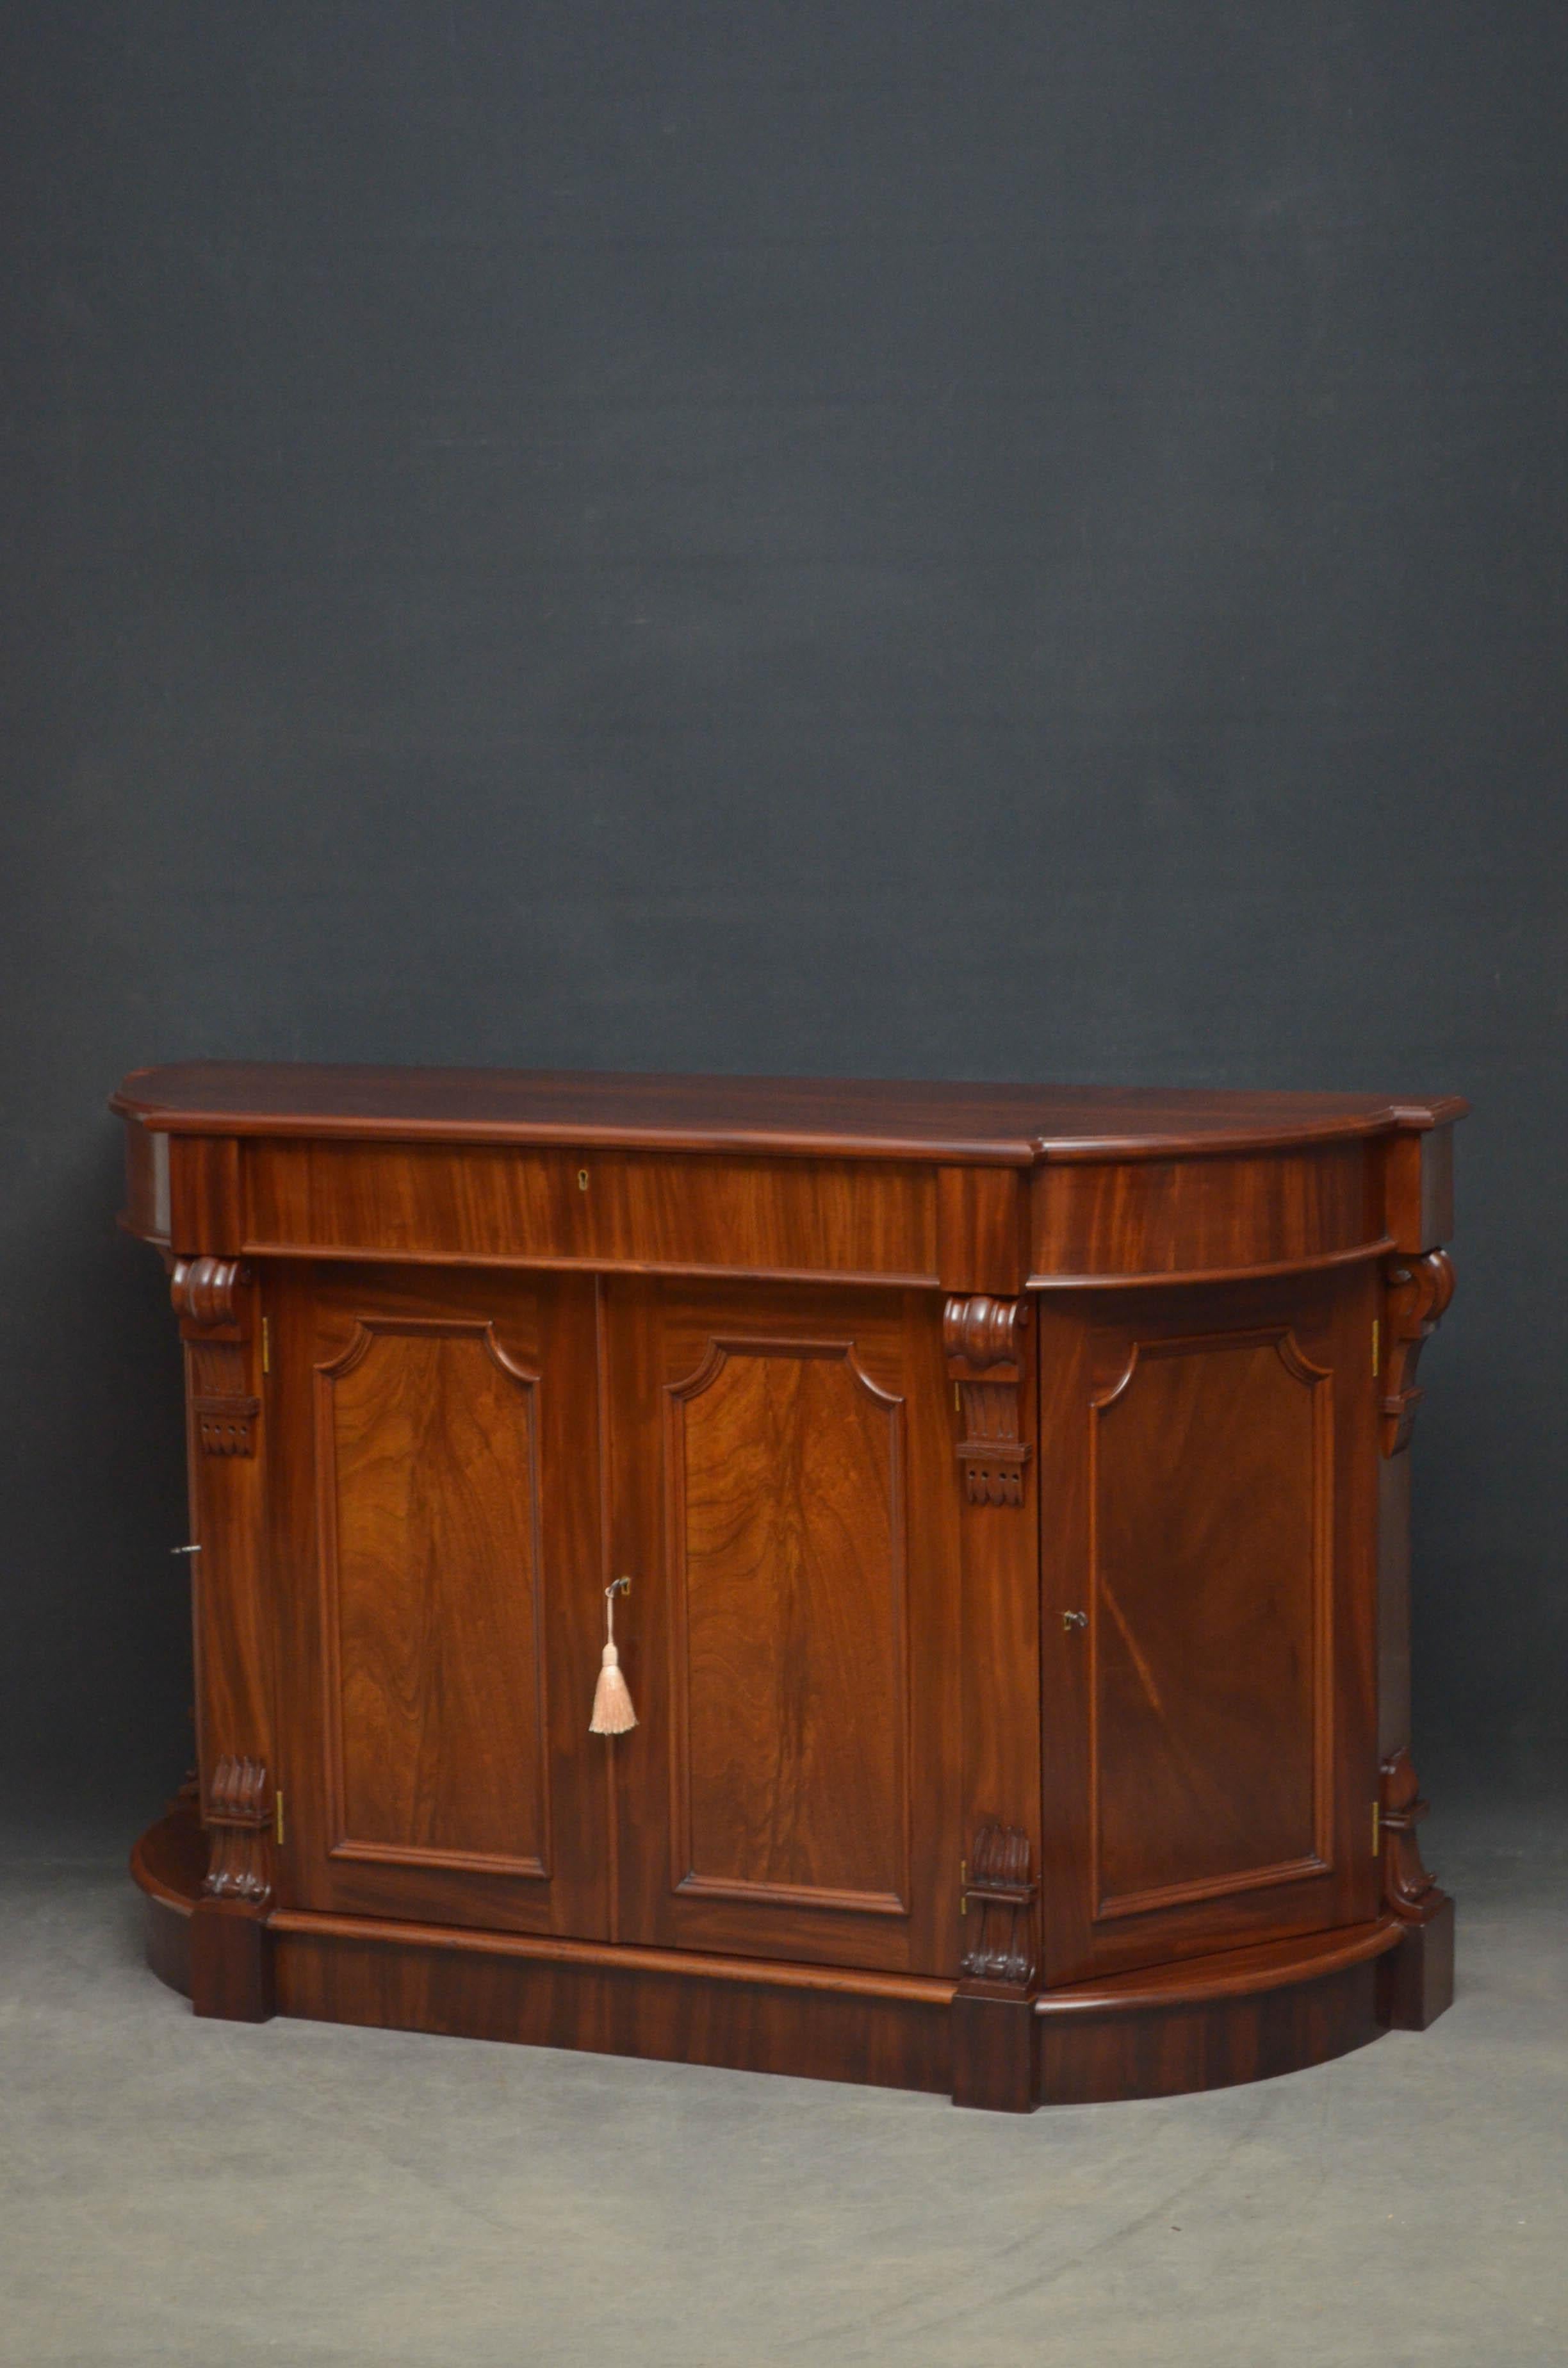 Sn4545, fine quality and very unusual Victorian, bow fronted sideboard in mahogany, having superb, figured mahogany top above a frieze drawer and 4 flamed mahogany panelled doors, all fitted with original working locks and keys and flanked by drop